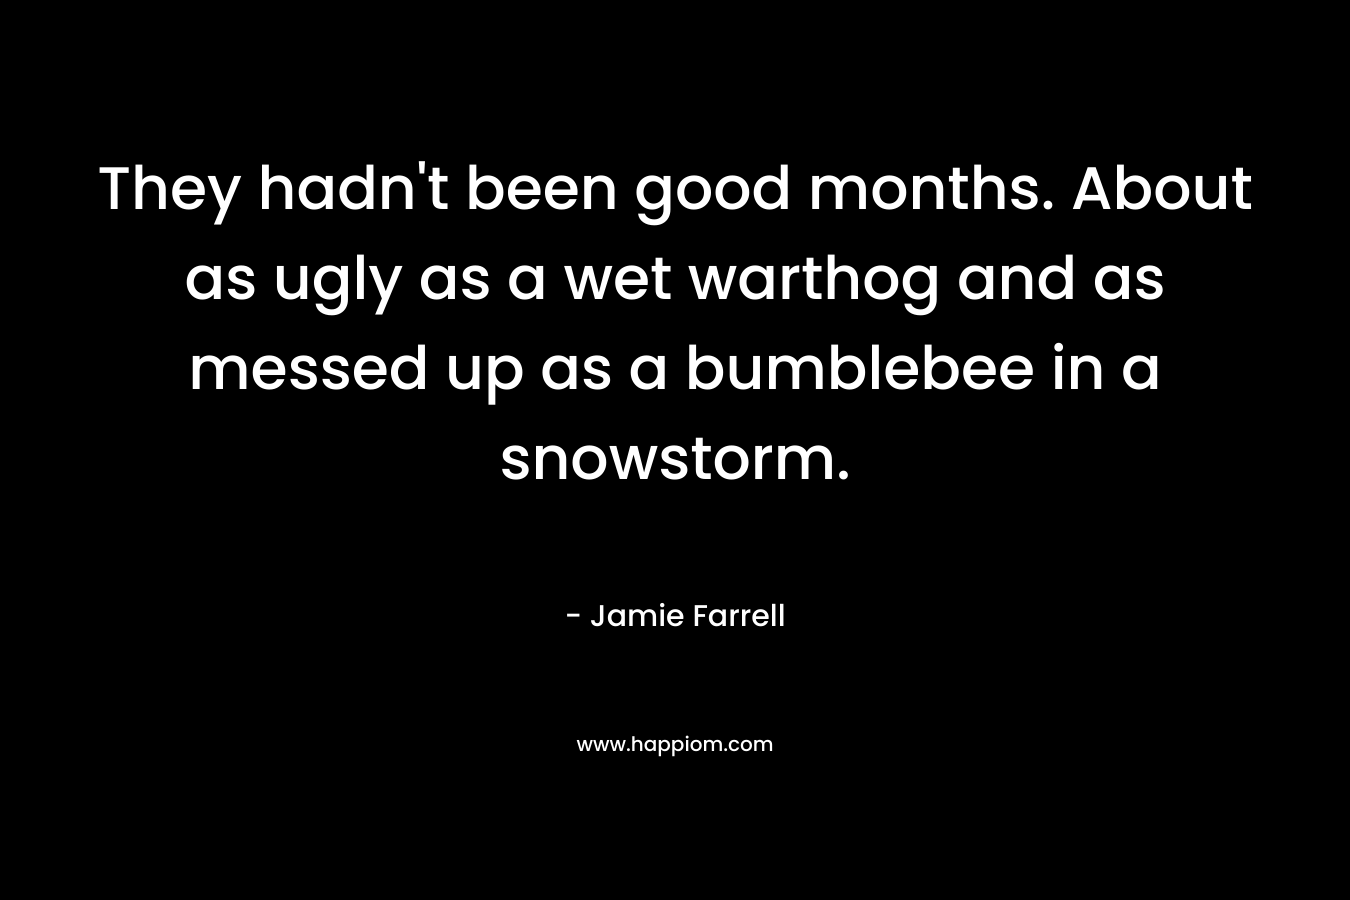 They hadn’t been good months. About as ugly as a wet warthog and as messed up as a bumblebee in a snowstorm. – Jamie Farrell